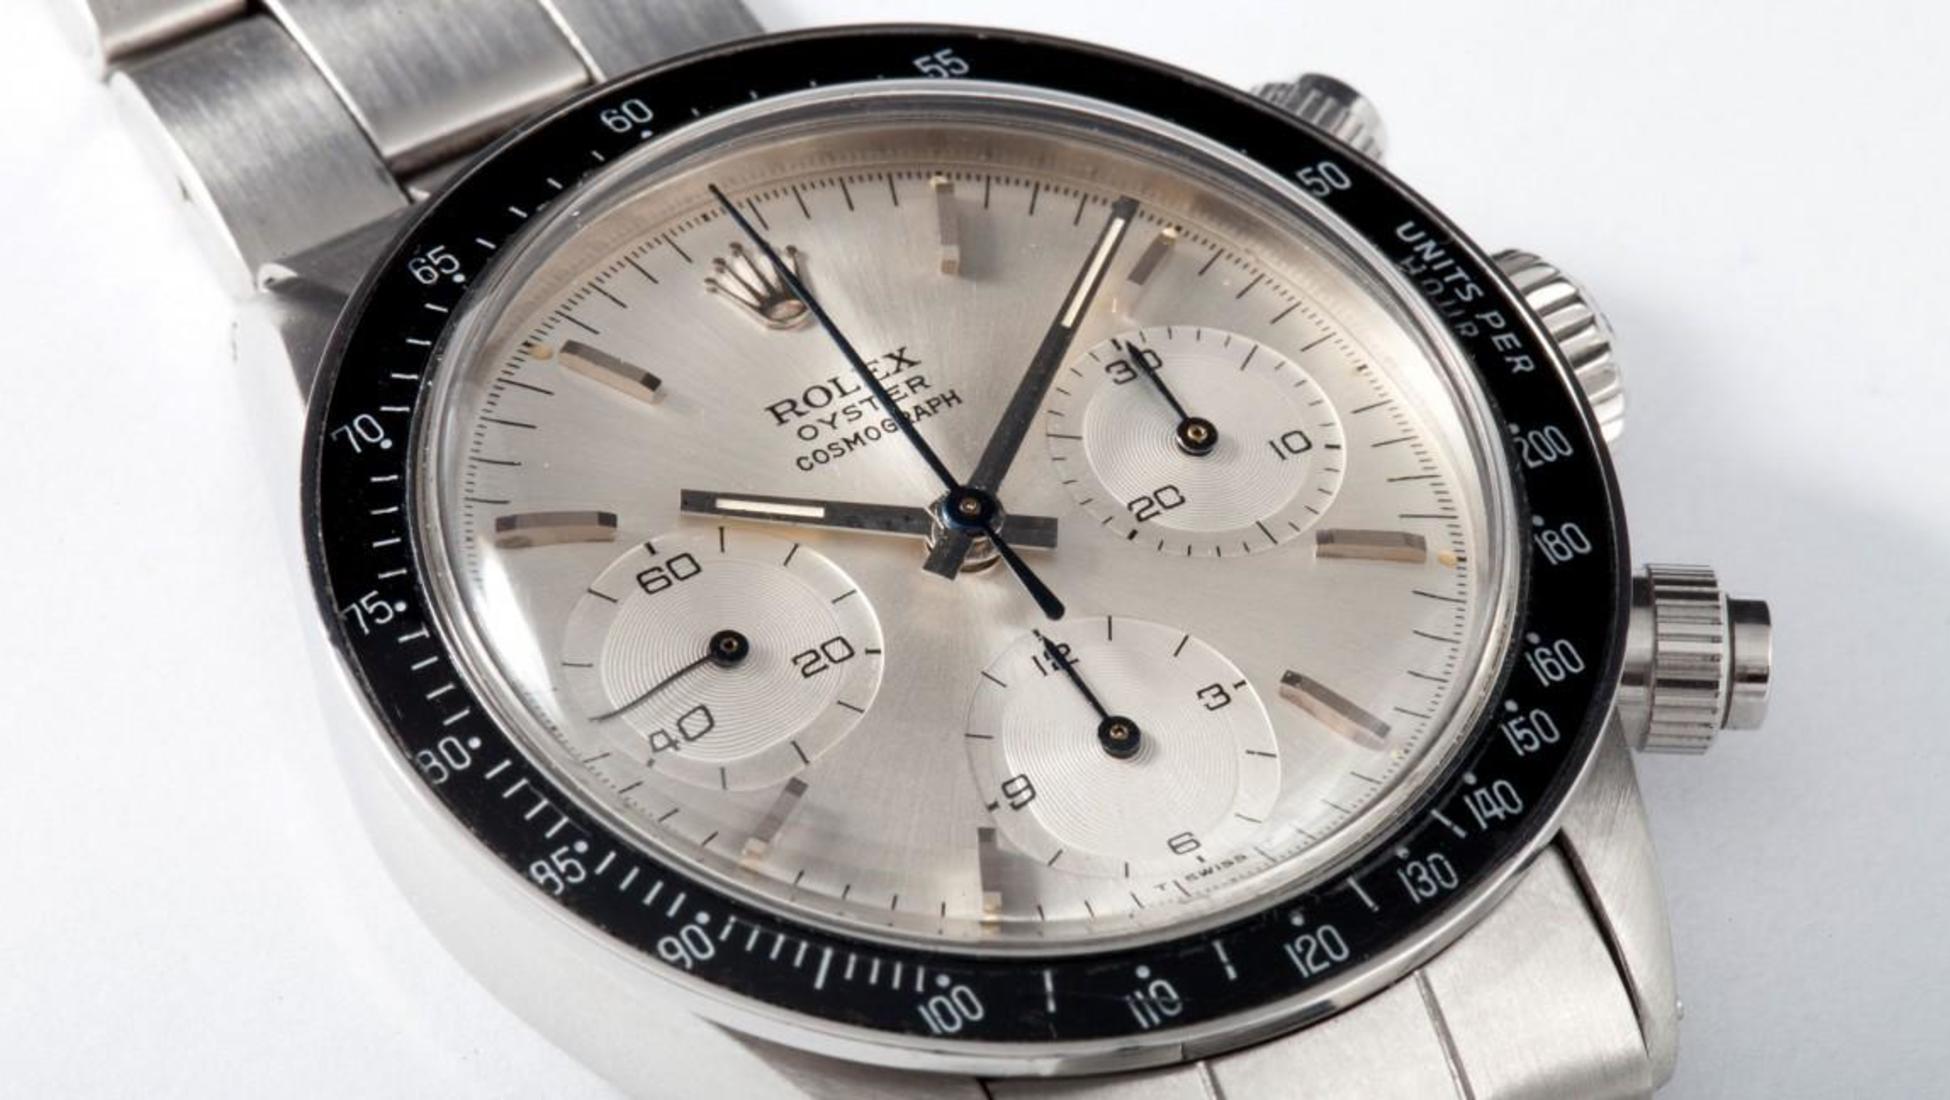 Jaeger-LeCoultre Watch auction - Catawiki